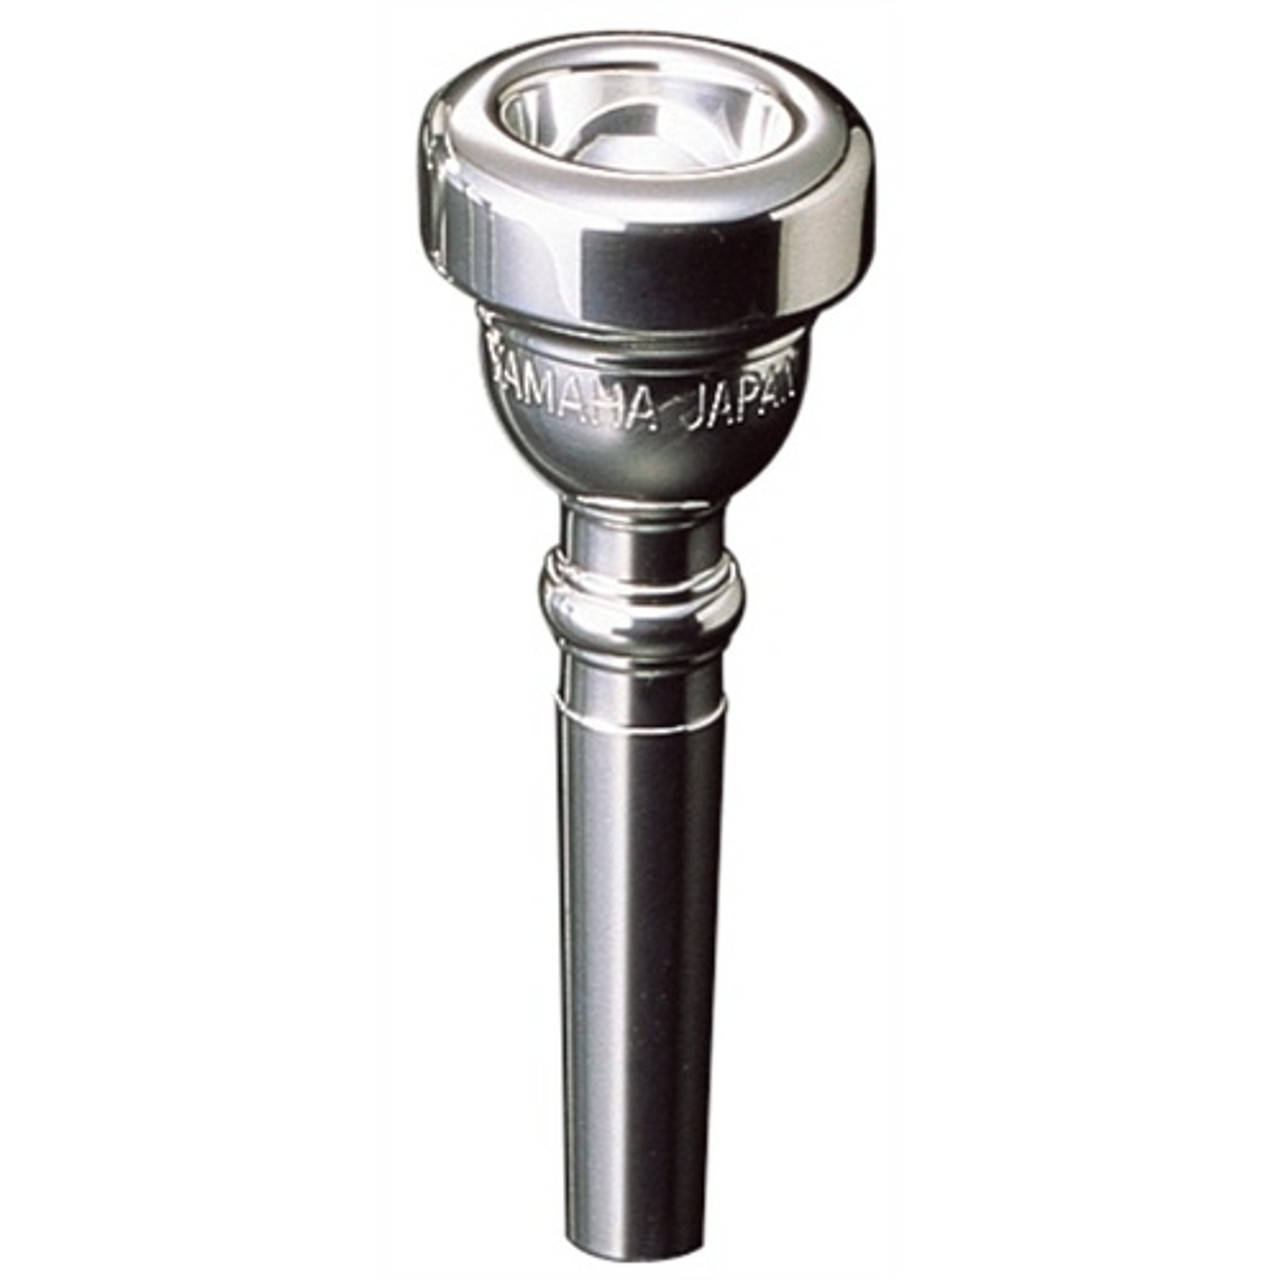 Bach 11C Trumpet Mouthpiece, Silver at Gear4music